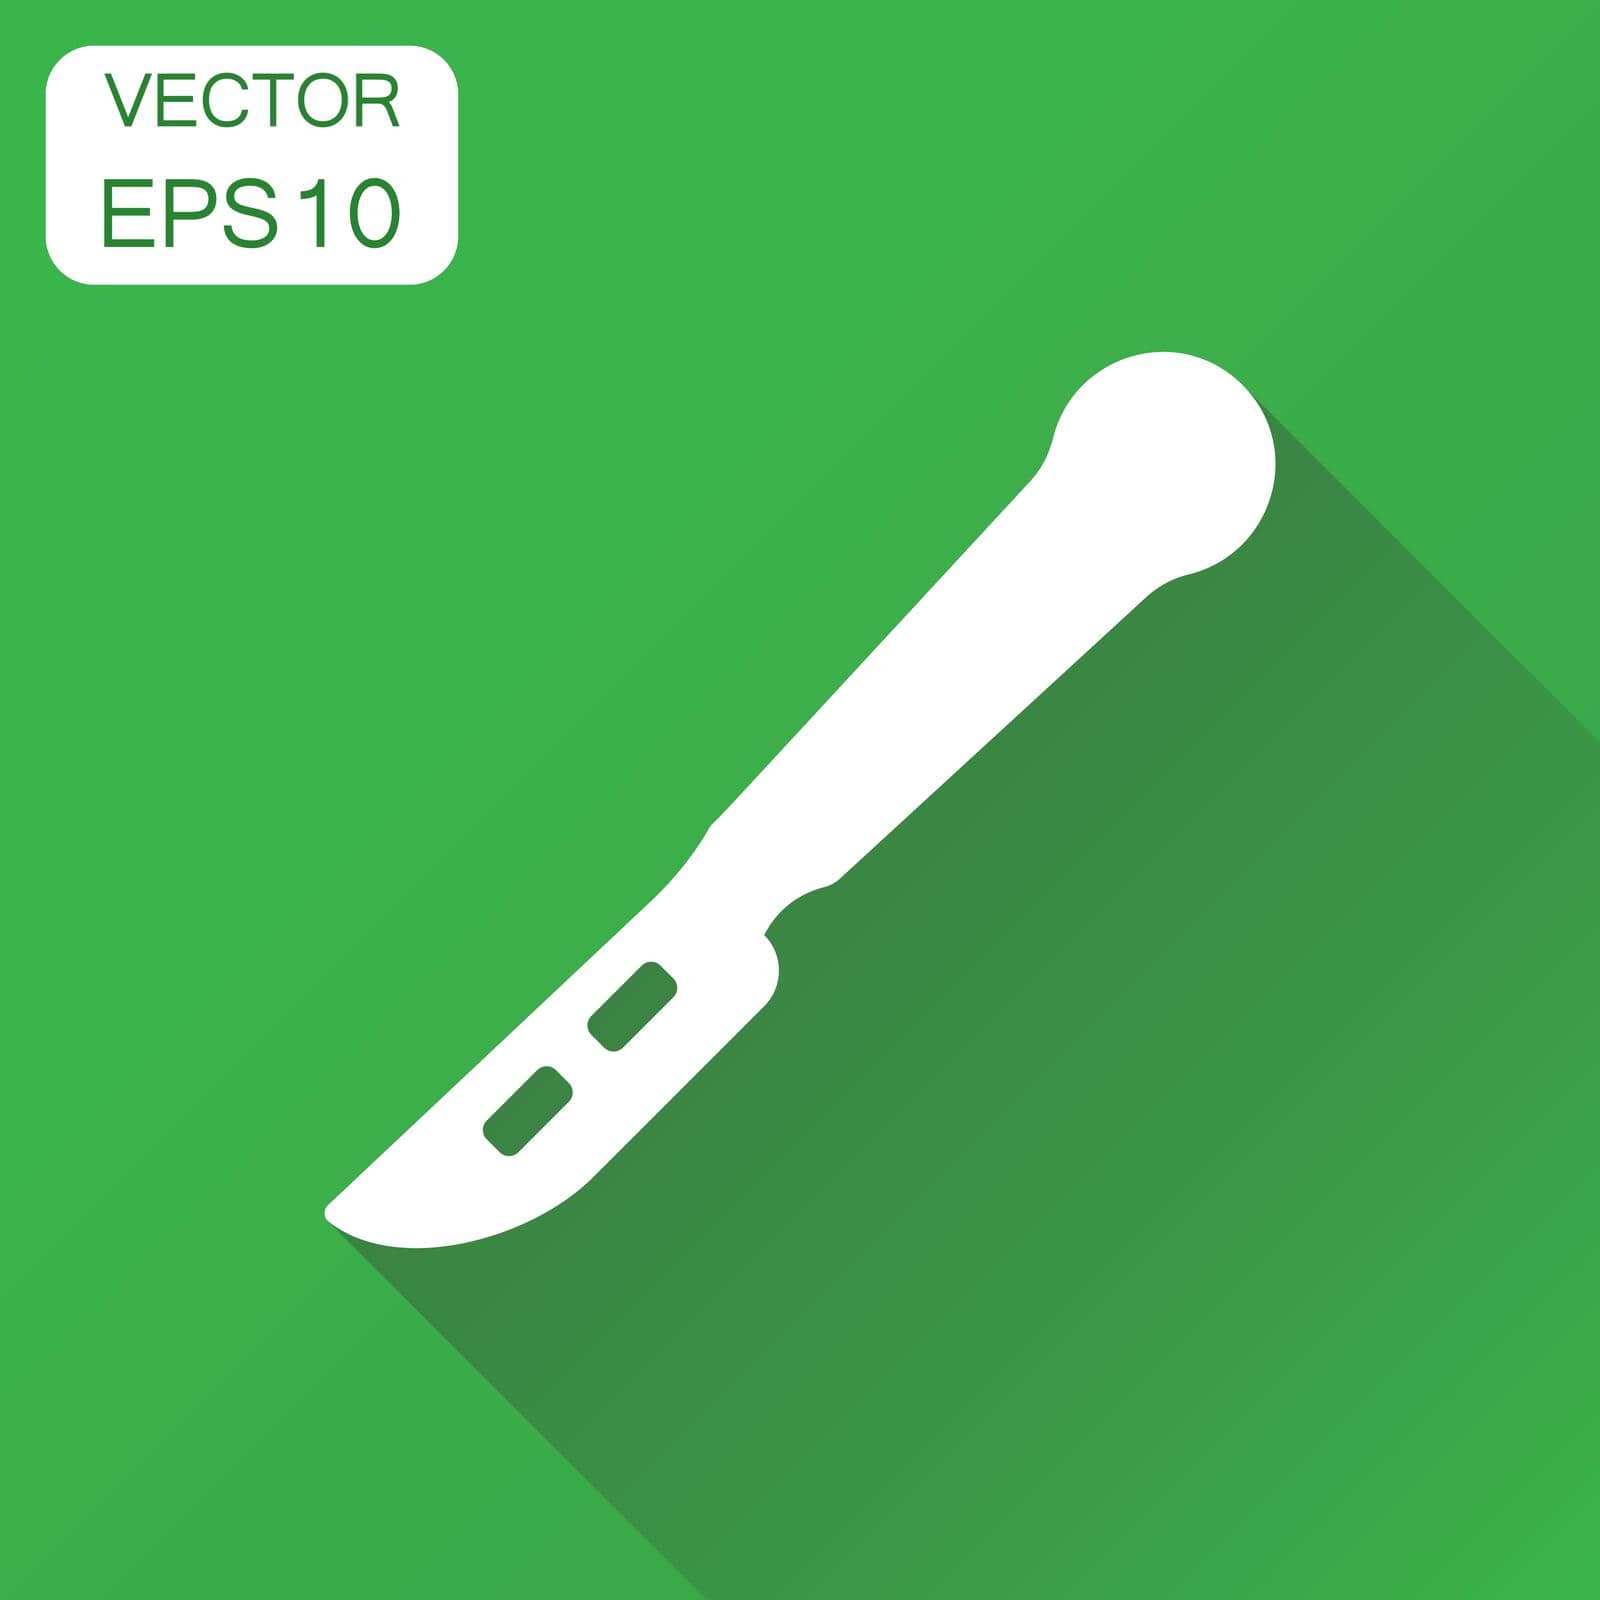 Medical scalpel icon. Business concept hospital surgery knife pictogram. Vector illustration on green background with long shadow. by LysenkoA